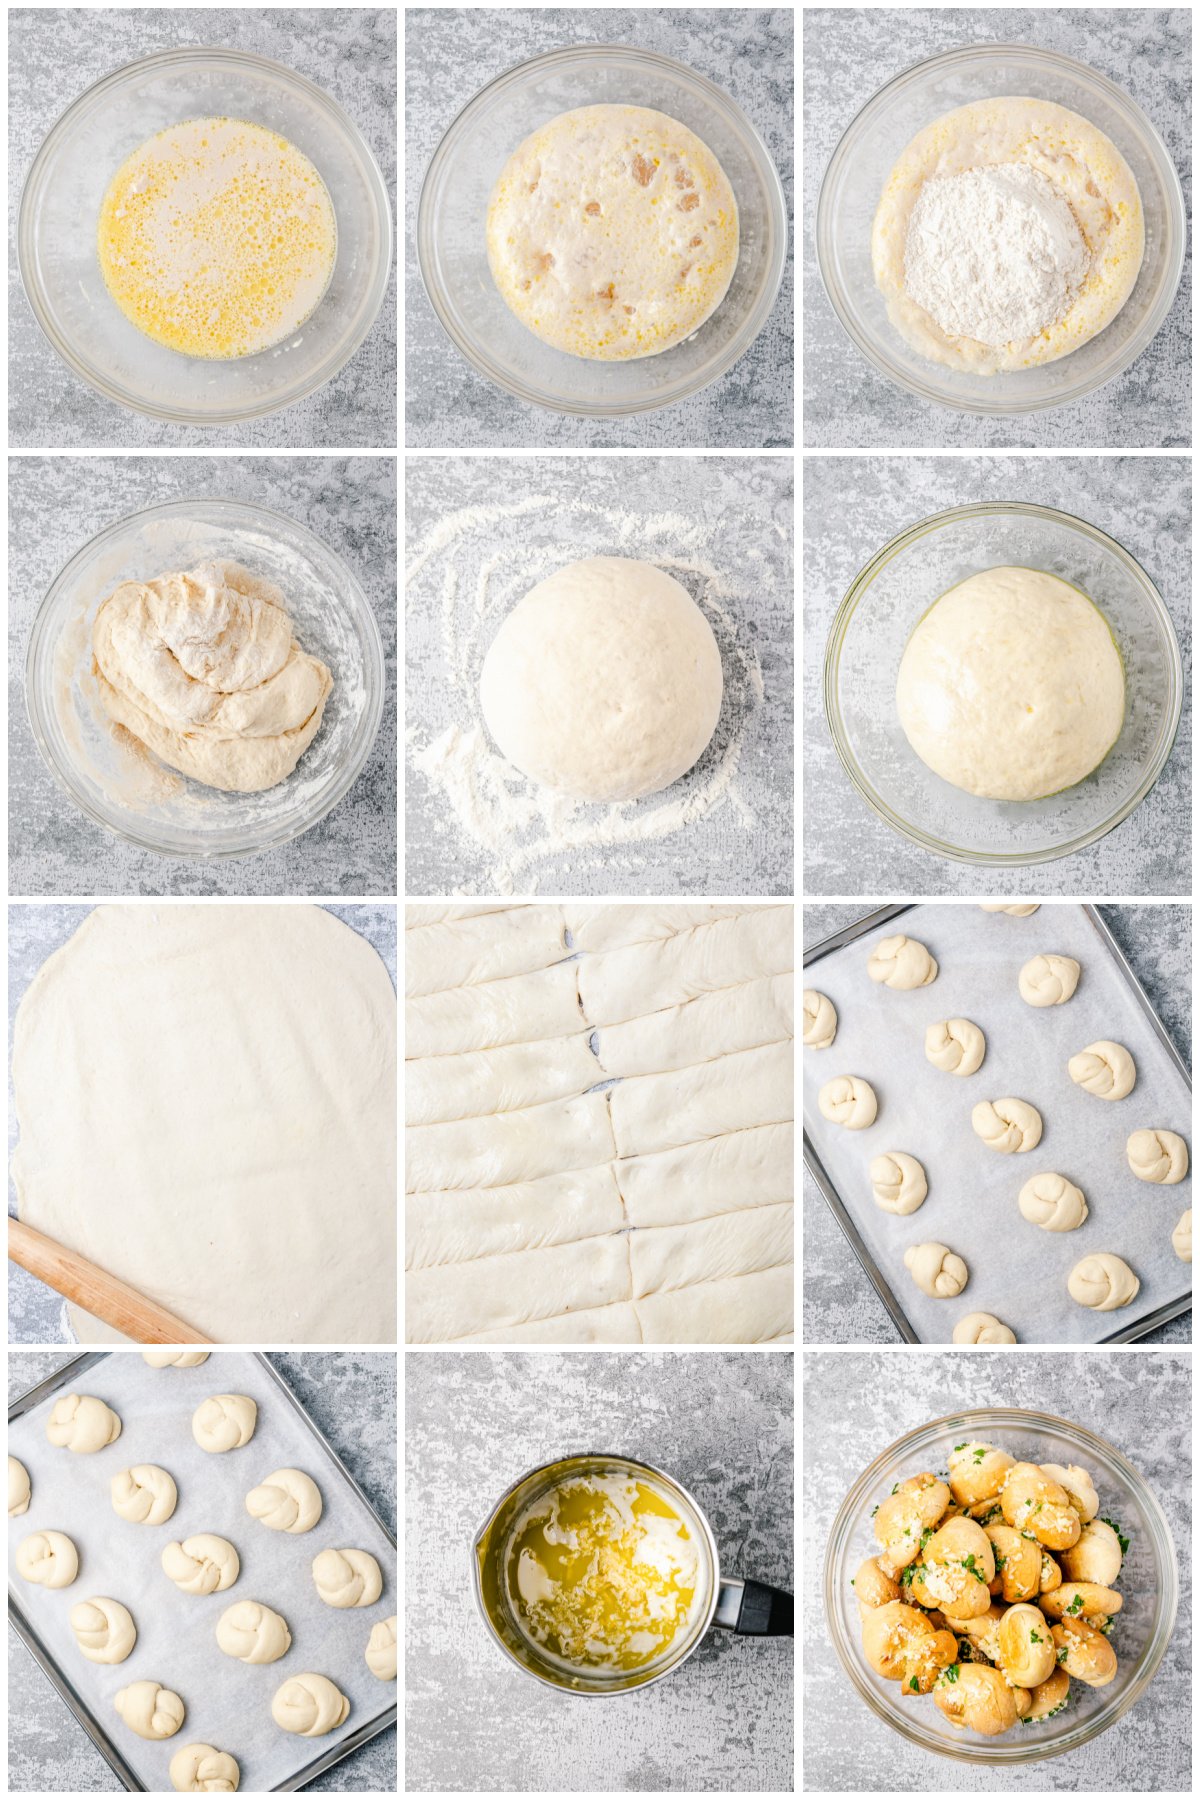 Step by step photos on how to make a Garlic Knots Recipe